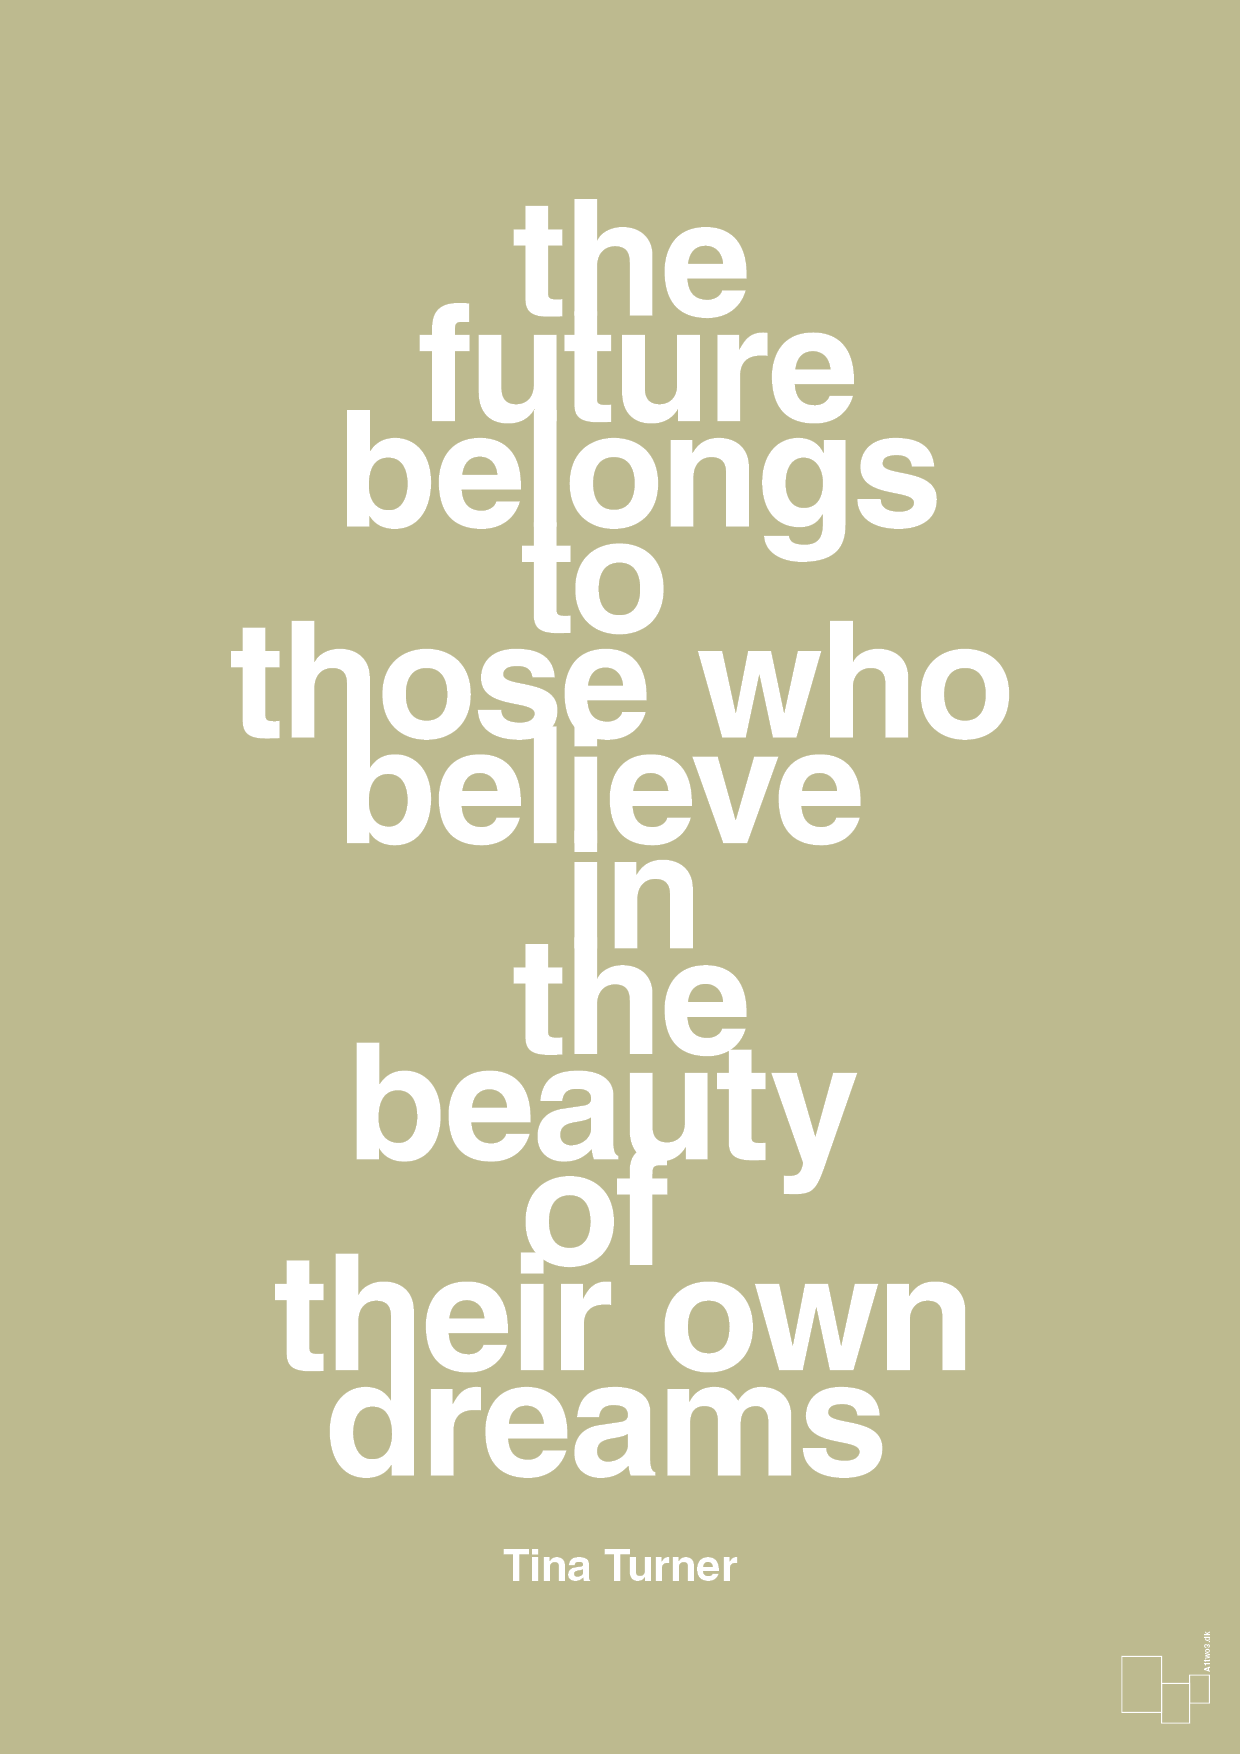 the future belongs to those who believe in the beauty of their own dreams - Plakat med Citater i Back to Nature